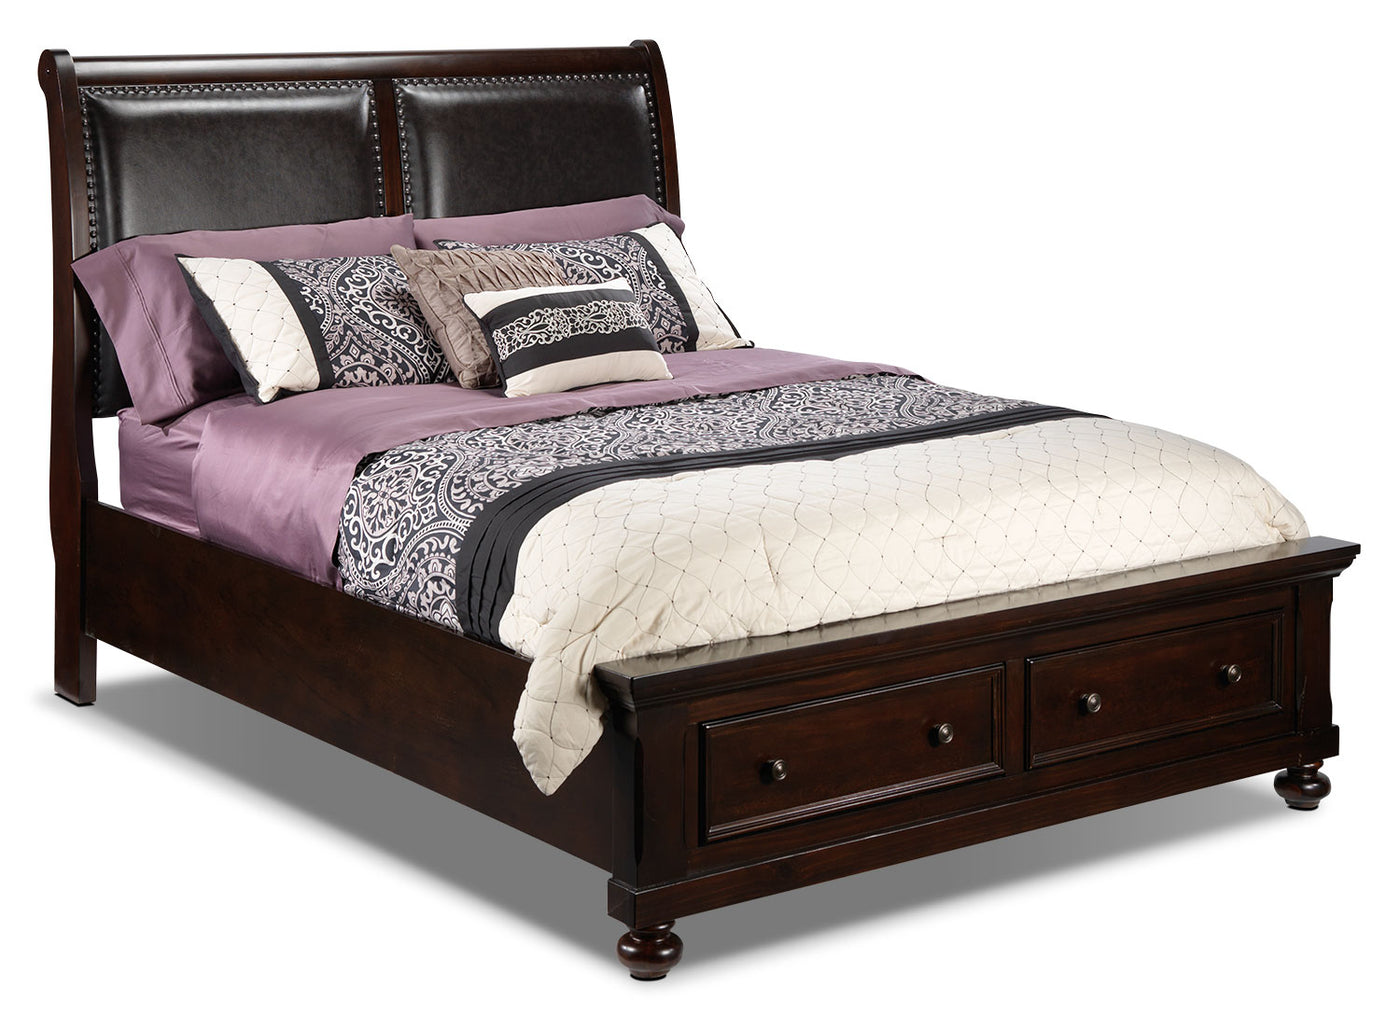 Chester 3-Piece King Storage Bed - Cherry